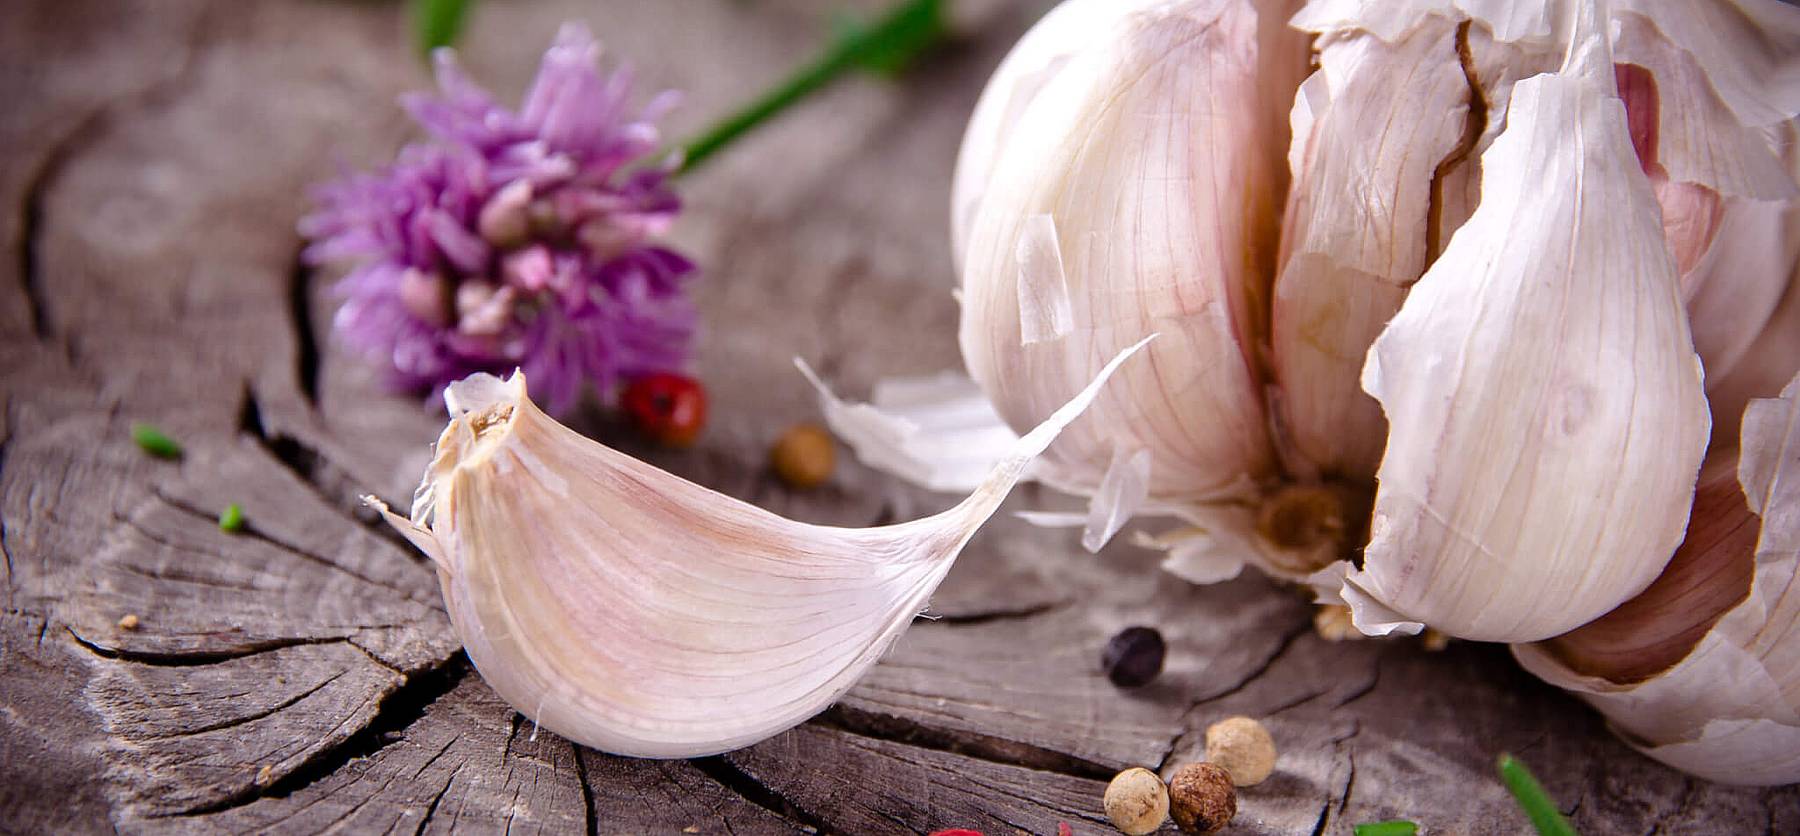 National Garlic Day (April 19th) Days Of The Year